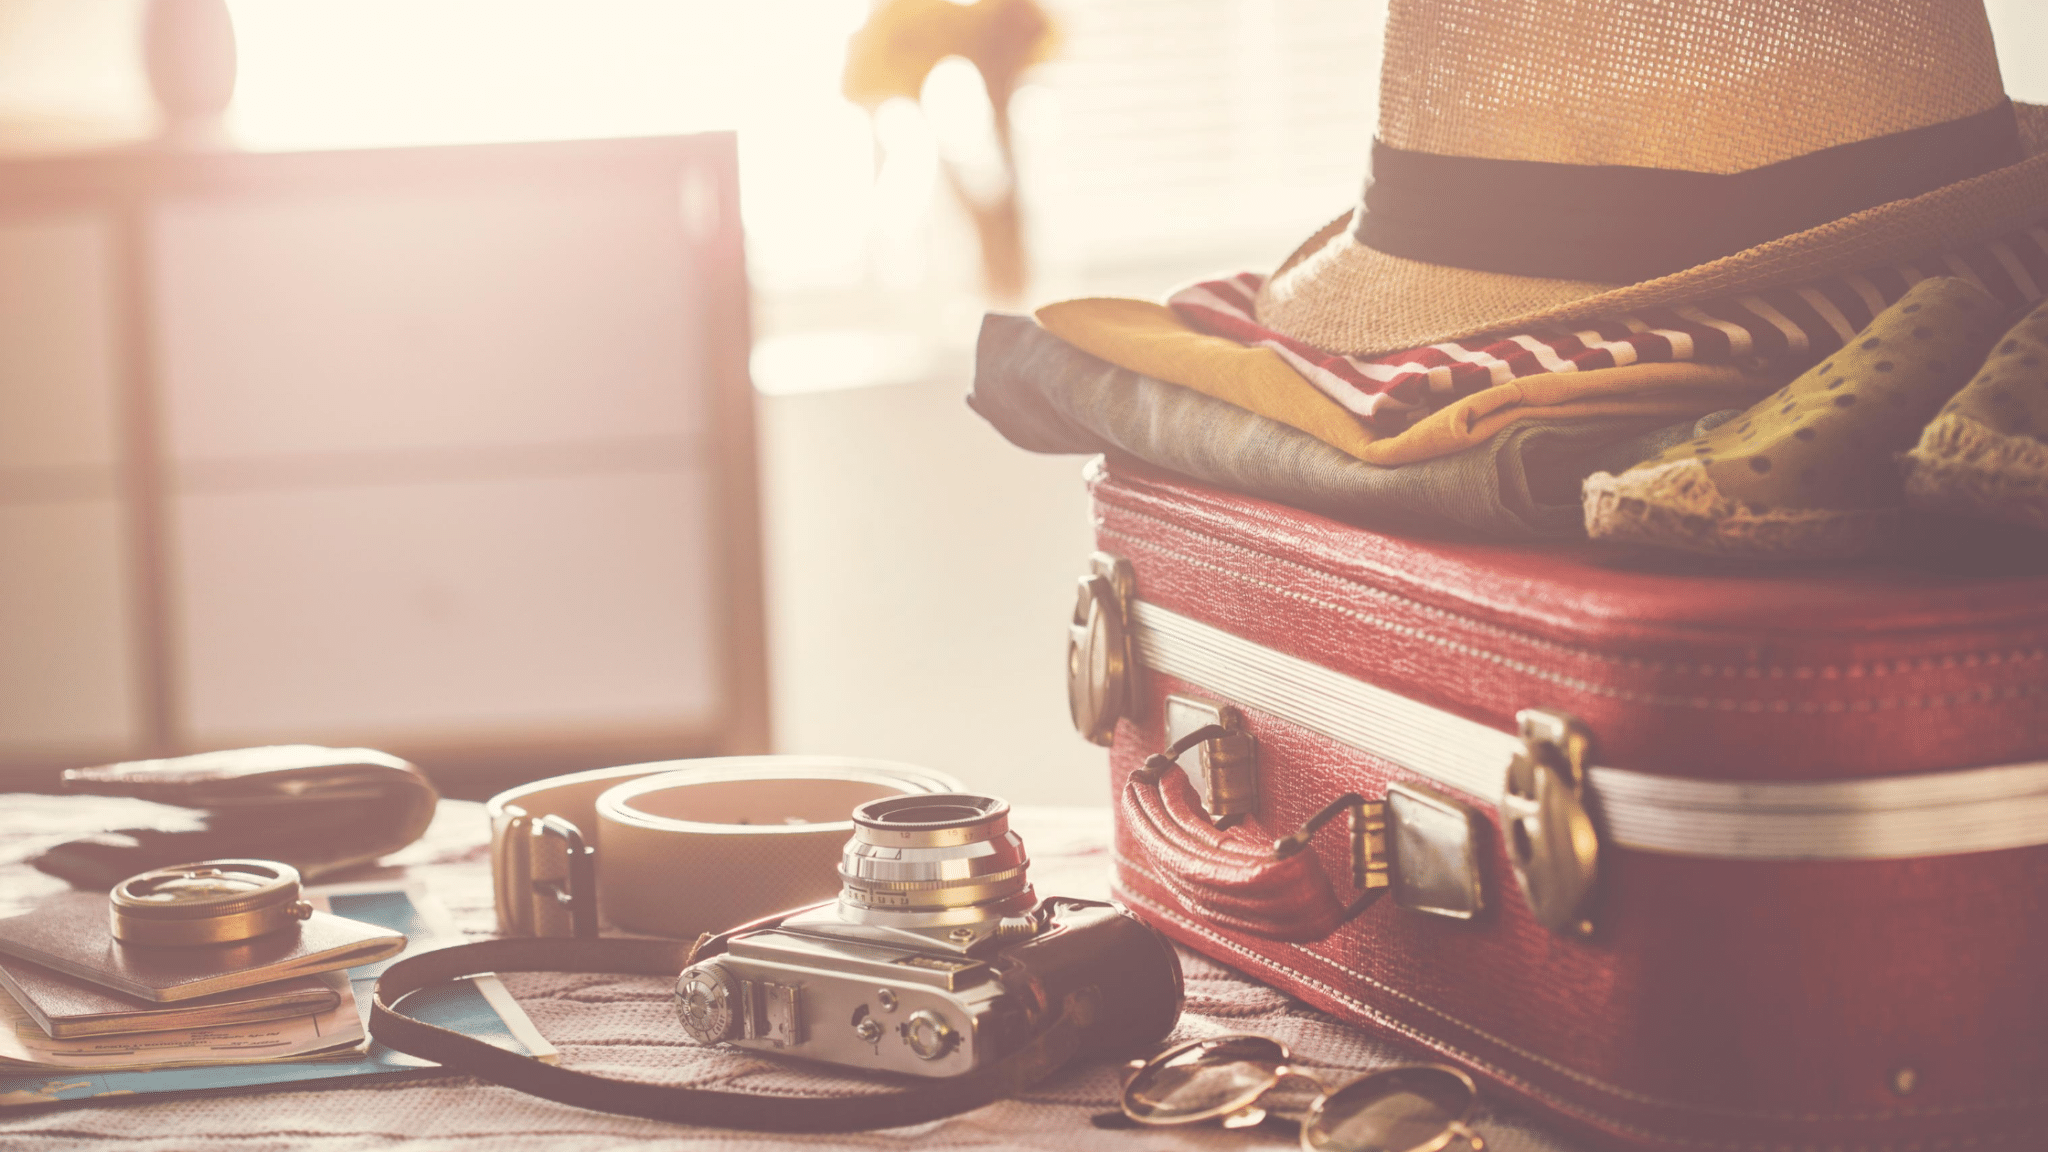 The 5 Best Ways To Travel With Your Filming Equipment